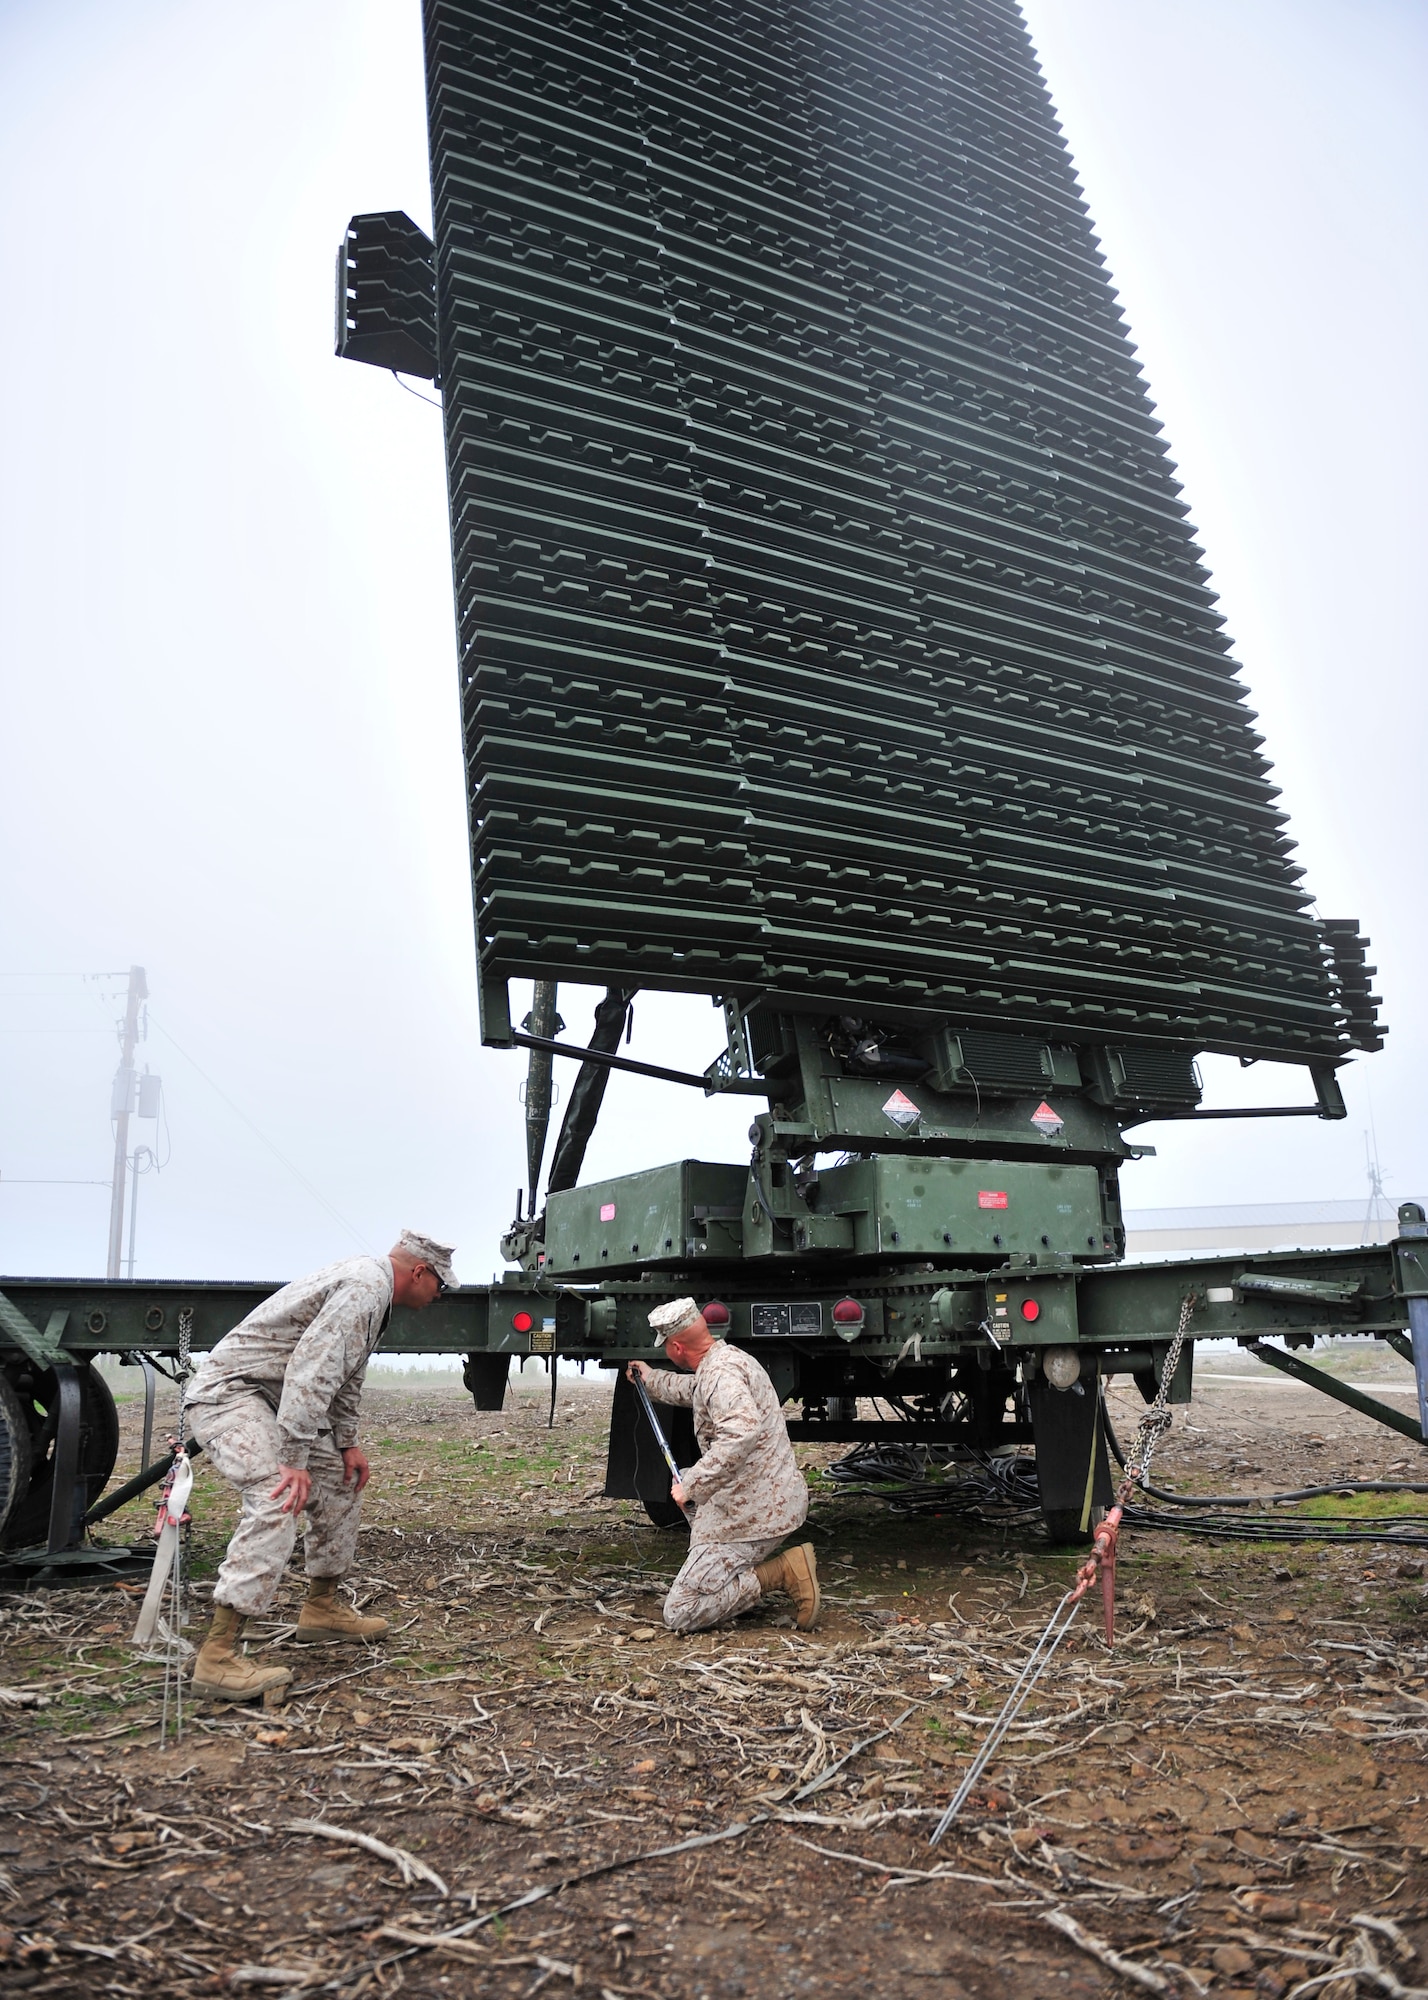 U.S. Marine Corps Gunnery Sgt. Alfredo Franco,  Marine Air Control Squadron 2, and Chief Warrant Officer 2 James Haunty, MACS-2 maintenance officer both assigned to Marine Corps Air Station Cherry Point, N.C., torque swing bolts on an AN/TPS-59 long range radar during Red Flag-Alaska 14-2 June 24, 2014, Joint Pacific Alaska Range Complex, Alaska. The AN/TPS-59 is a 3-D radar that detects an aircraft’s height and altitude to positively control them and find hostile aircraft. (U.S. Air Force photo by Senior Airman Ashley Nicole Taylor/Released)